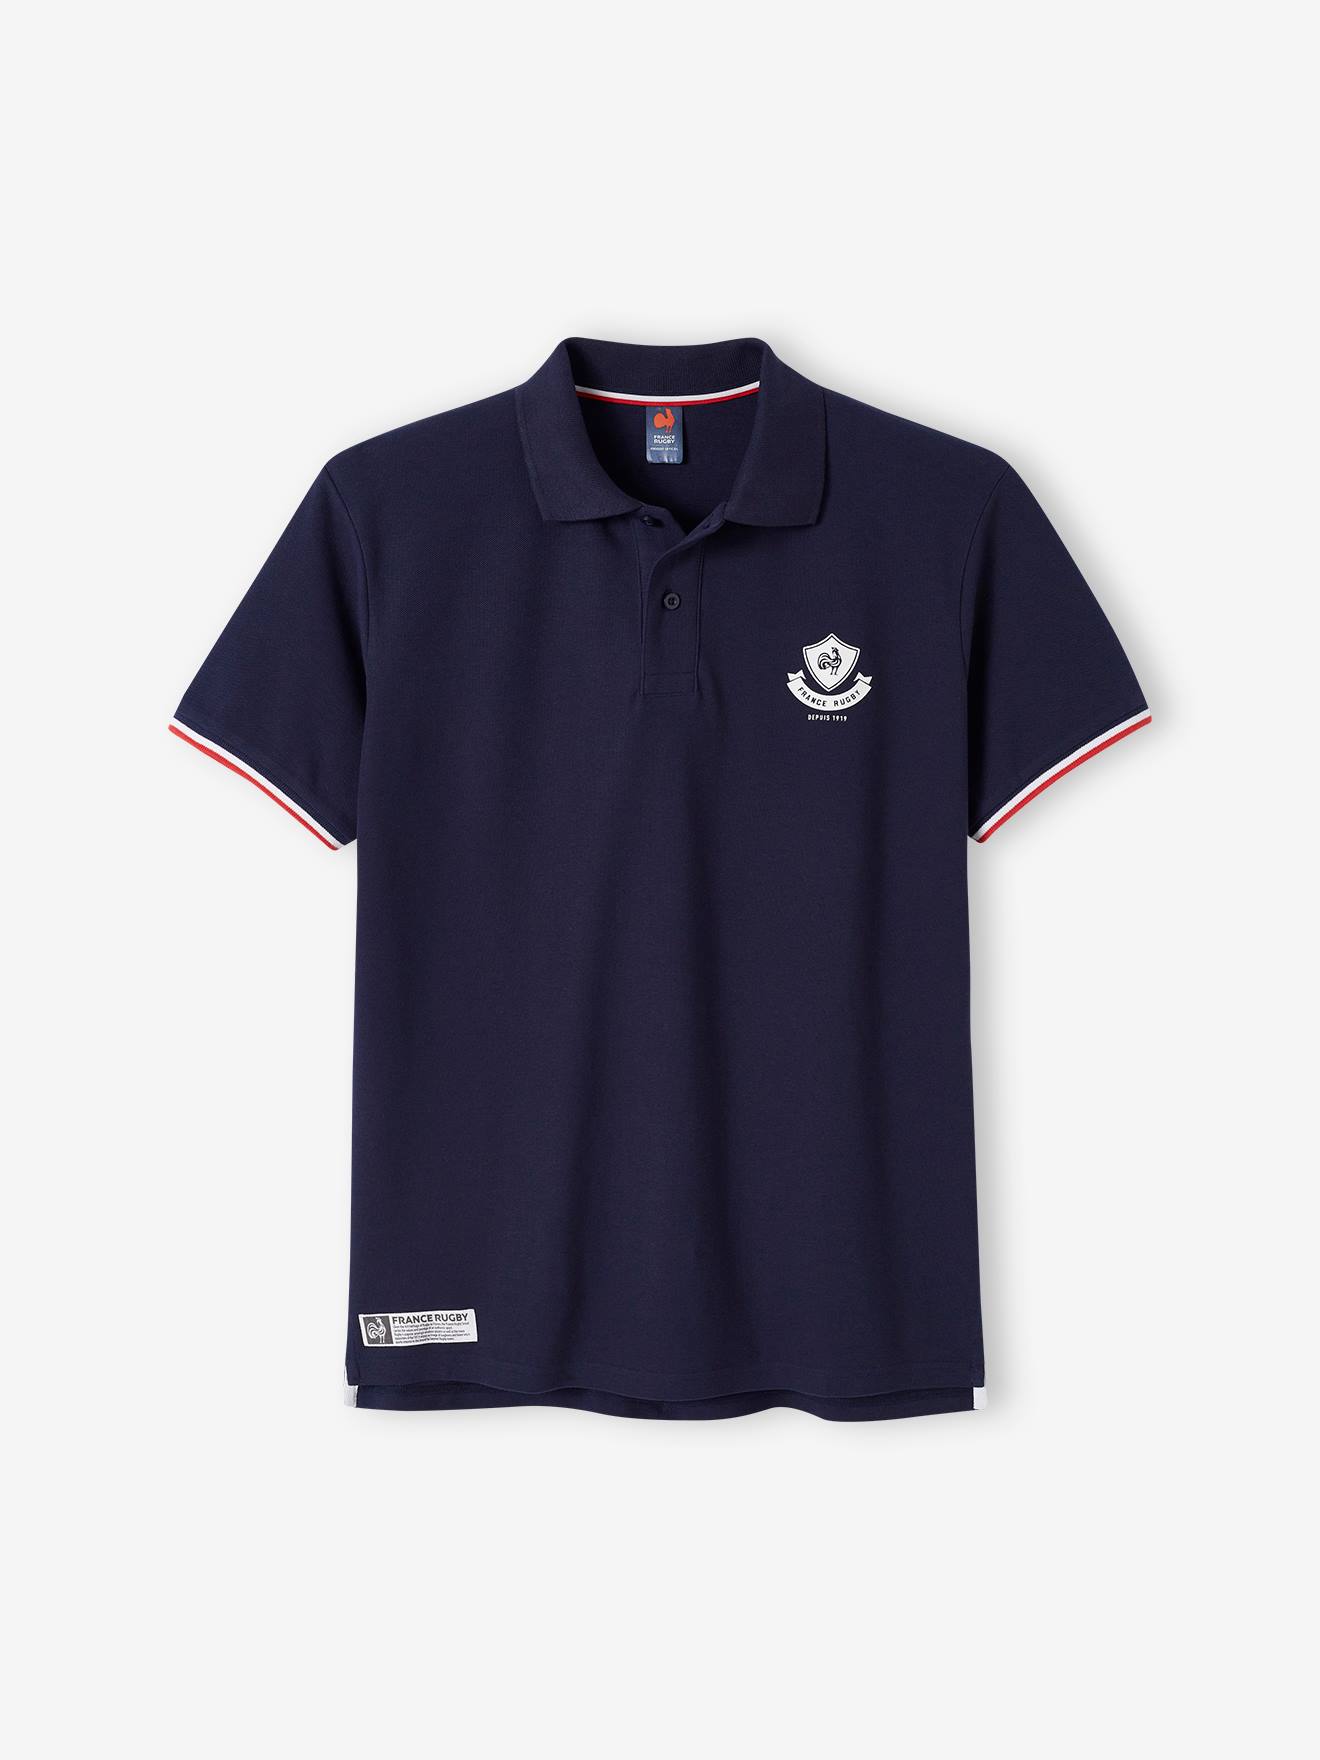 Short Sleeve France Rugby(r) Polo Shirt for Adults navy blue